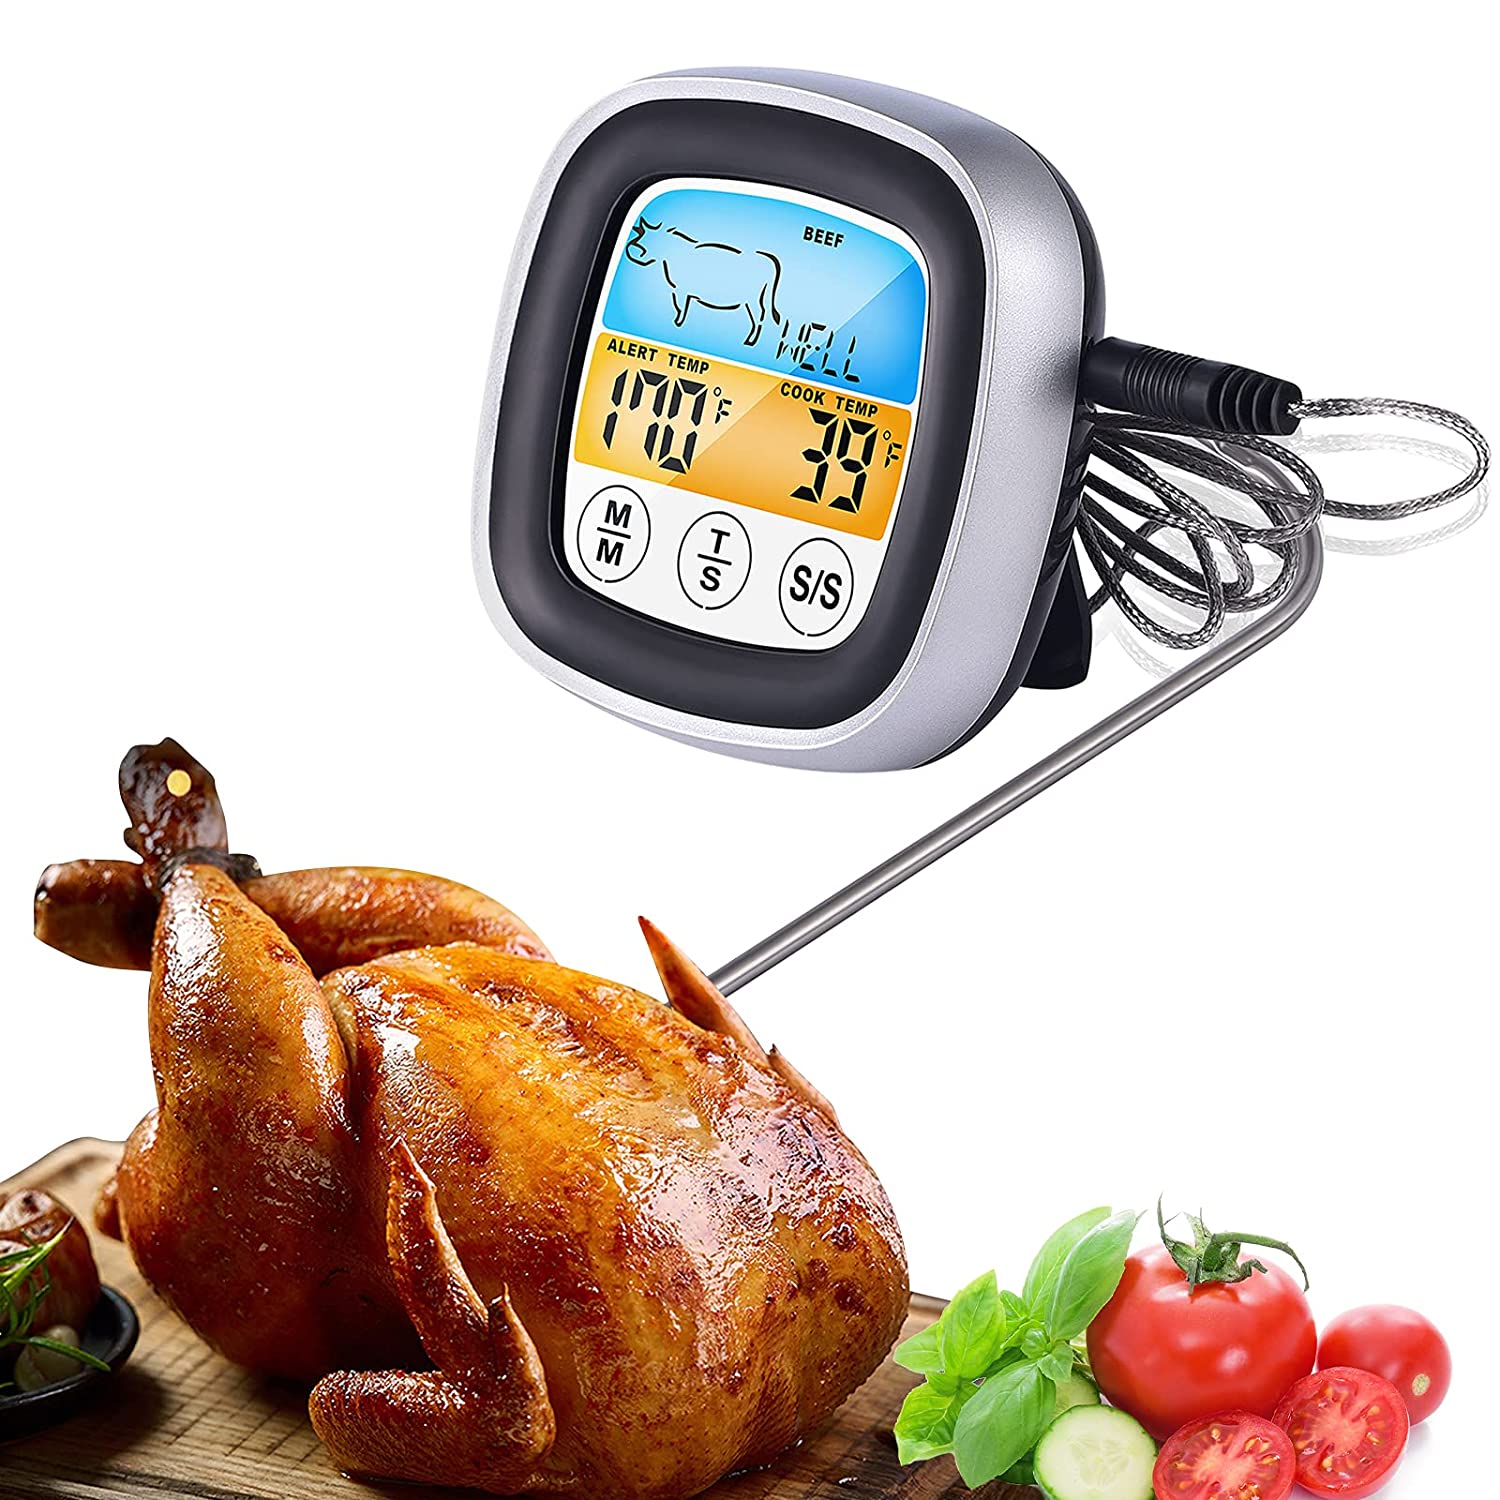 Instant Read Digital Meat Thermometer Touchscreen Food Thermometer with Sensitive Color LCD Backlight Display and Timer Modes for BBQ Kitchen Oven